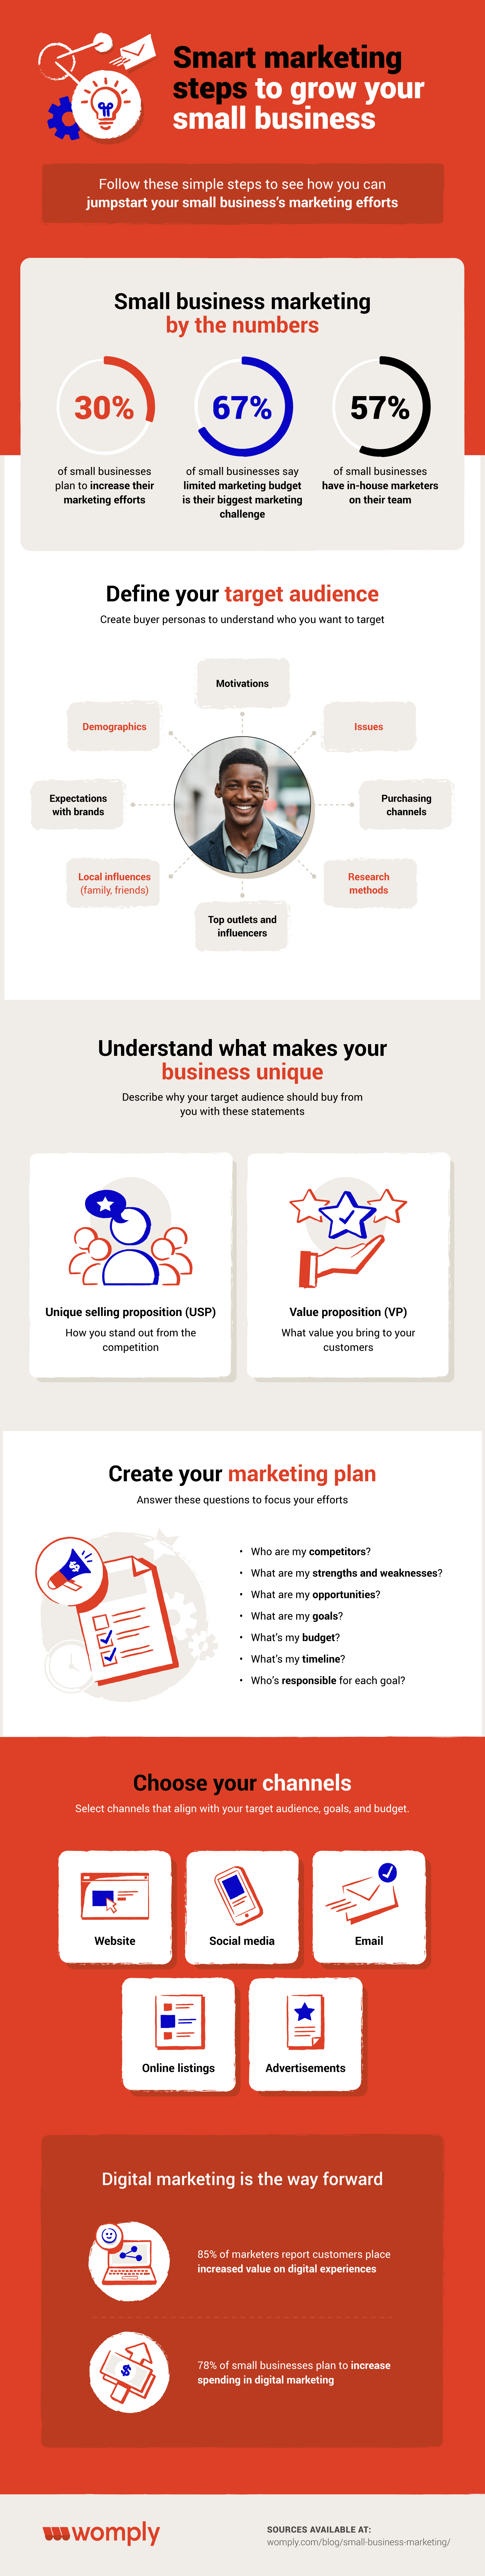 small business marketing infographic